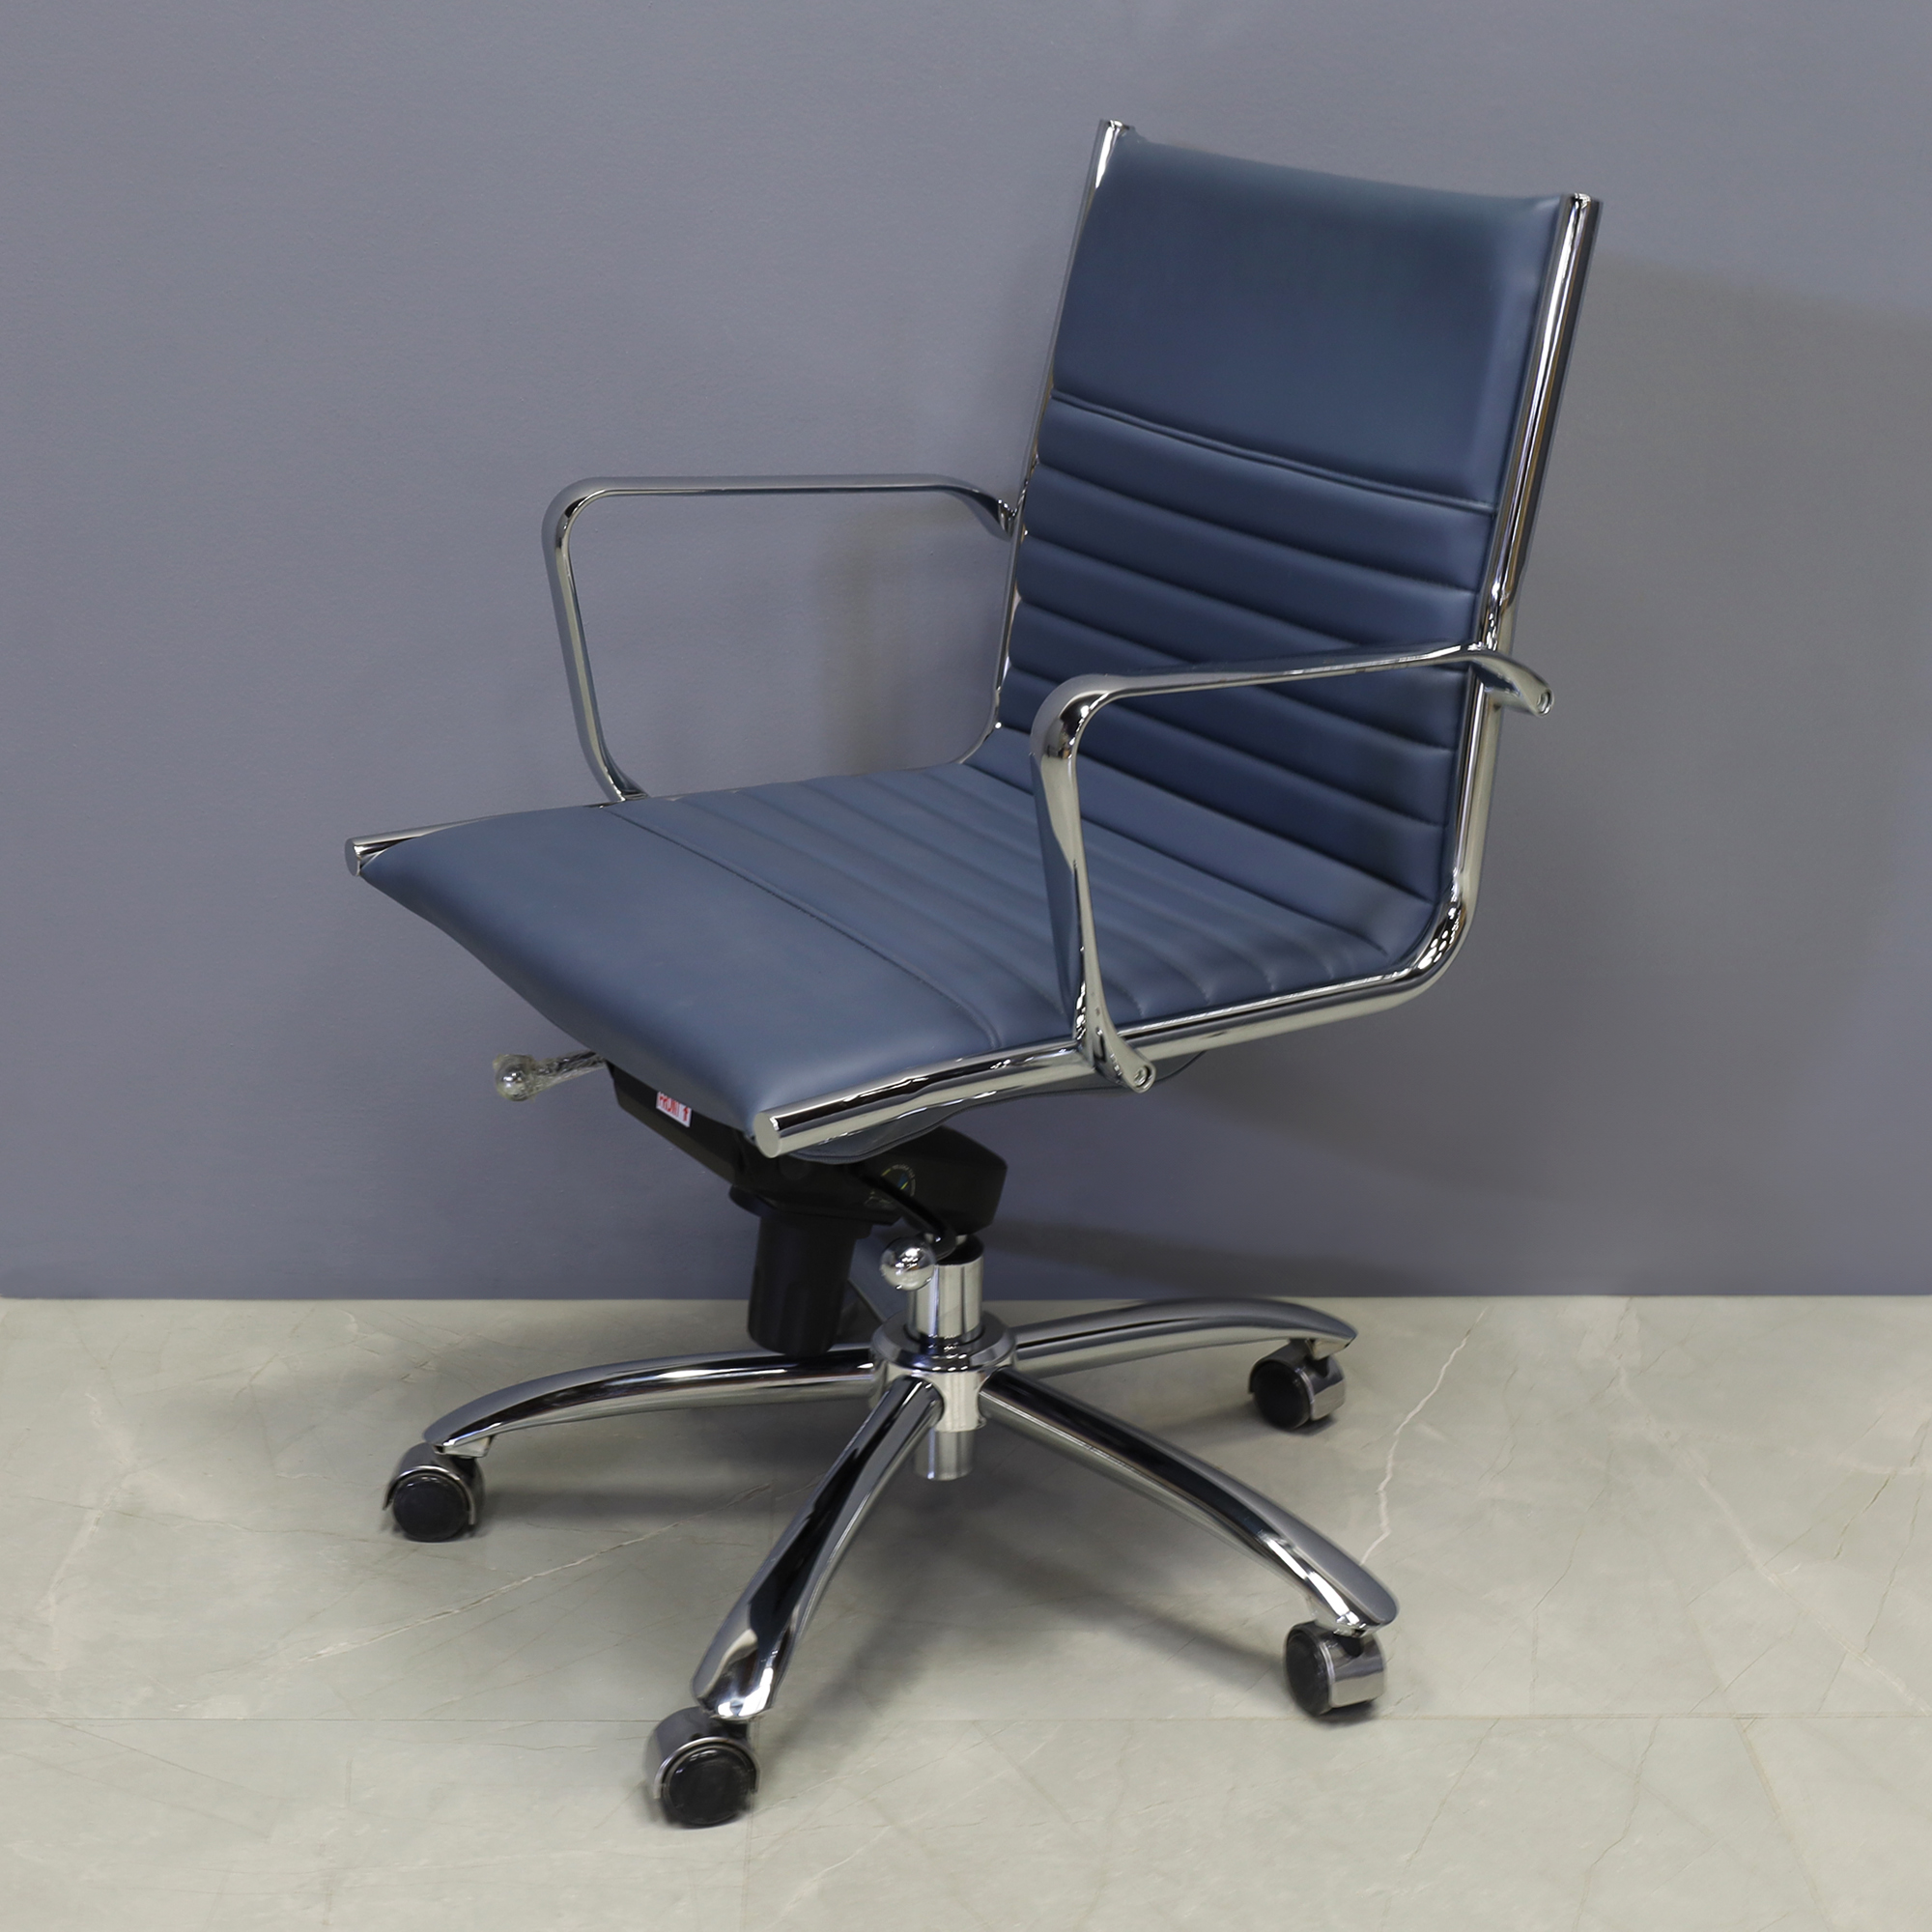 Dirk Low Back Office Chair in Blue Leatherette, shown here.